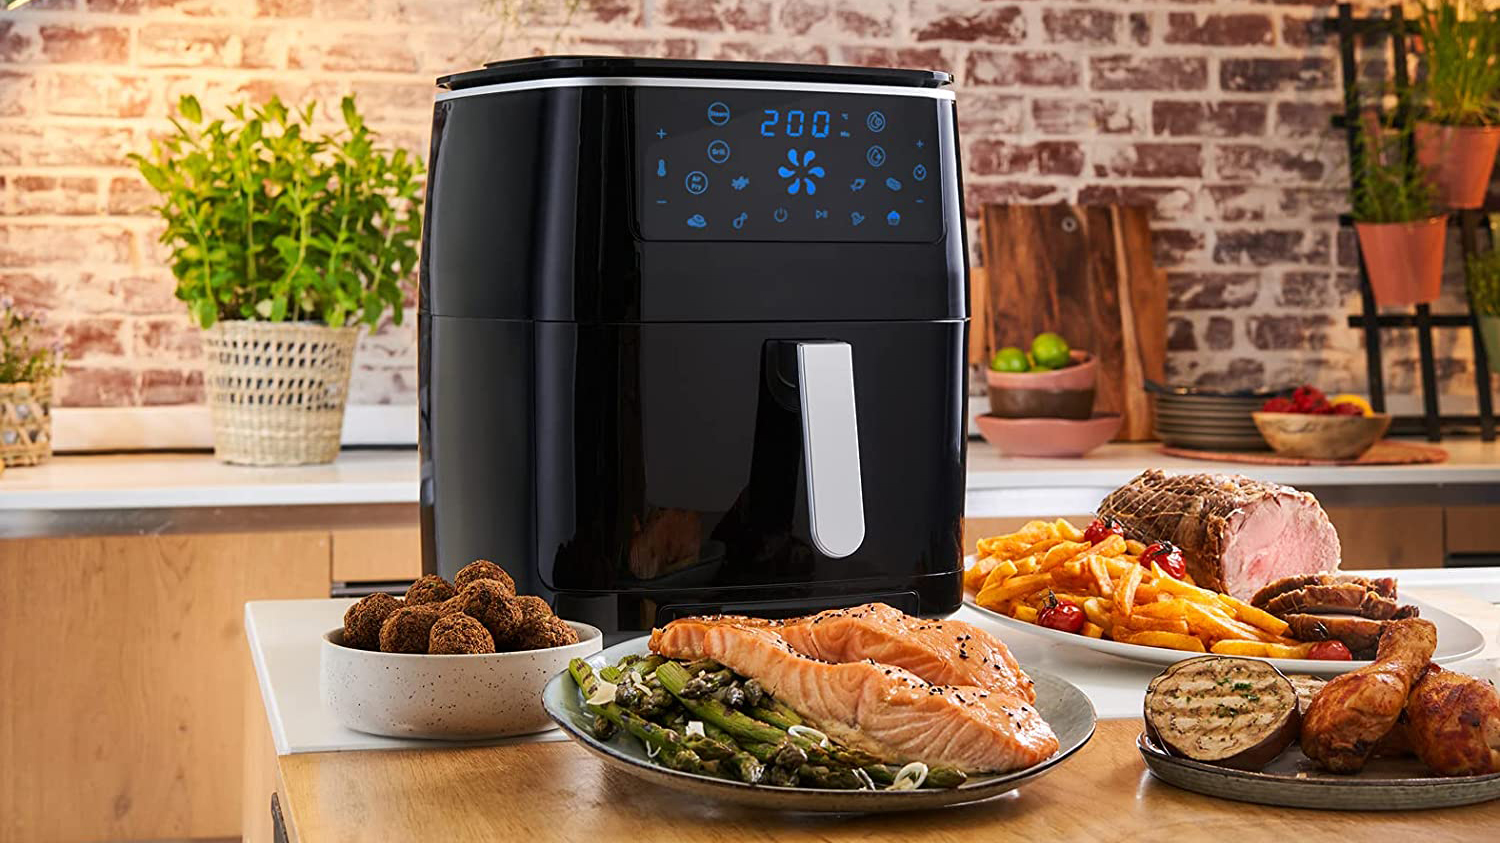 Concurrenten Moment Disco Tefal EasyFry Grill & Steam healthy fryer review: a 3-in-1 air fryer that  grills and steams too | T3